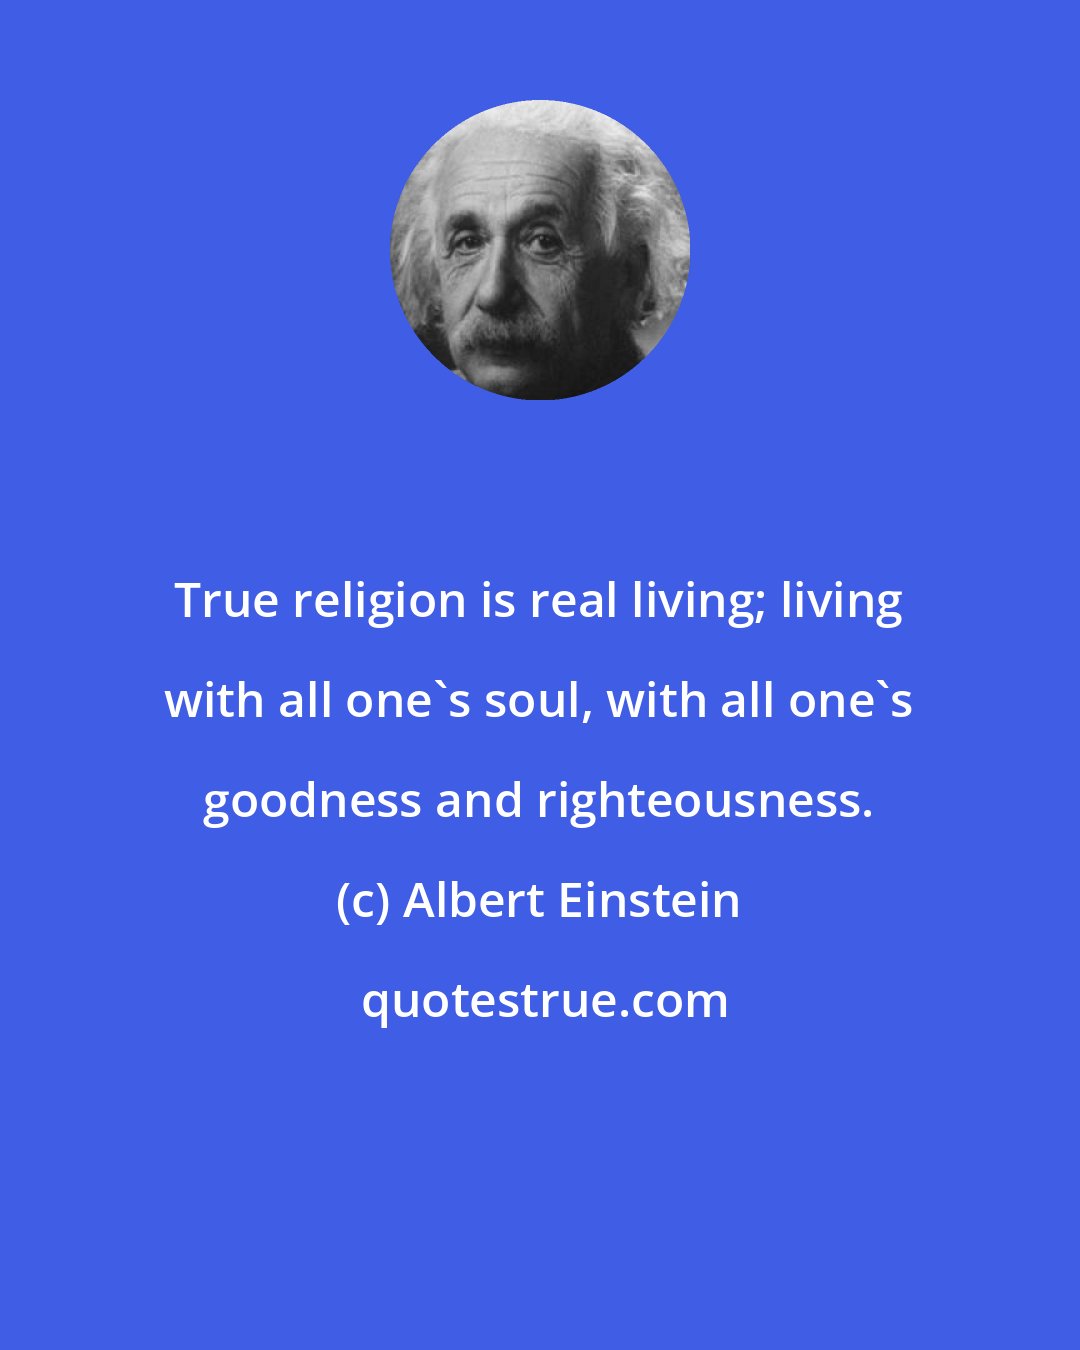 Albert Einstein: True religion is real living; living with all one's soul, with all one's goodness and righteousness.